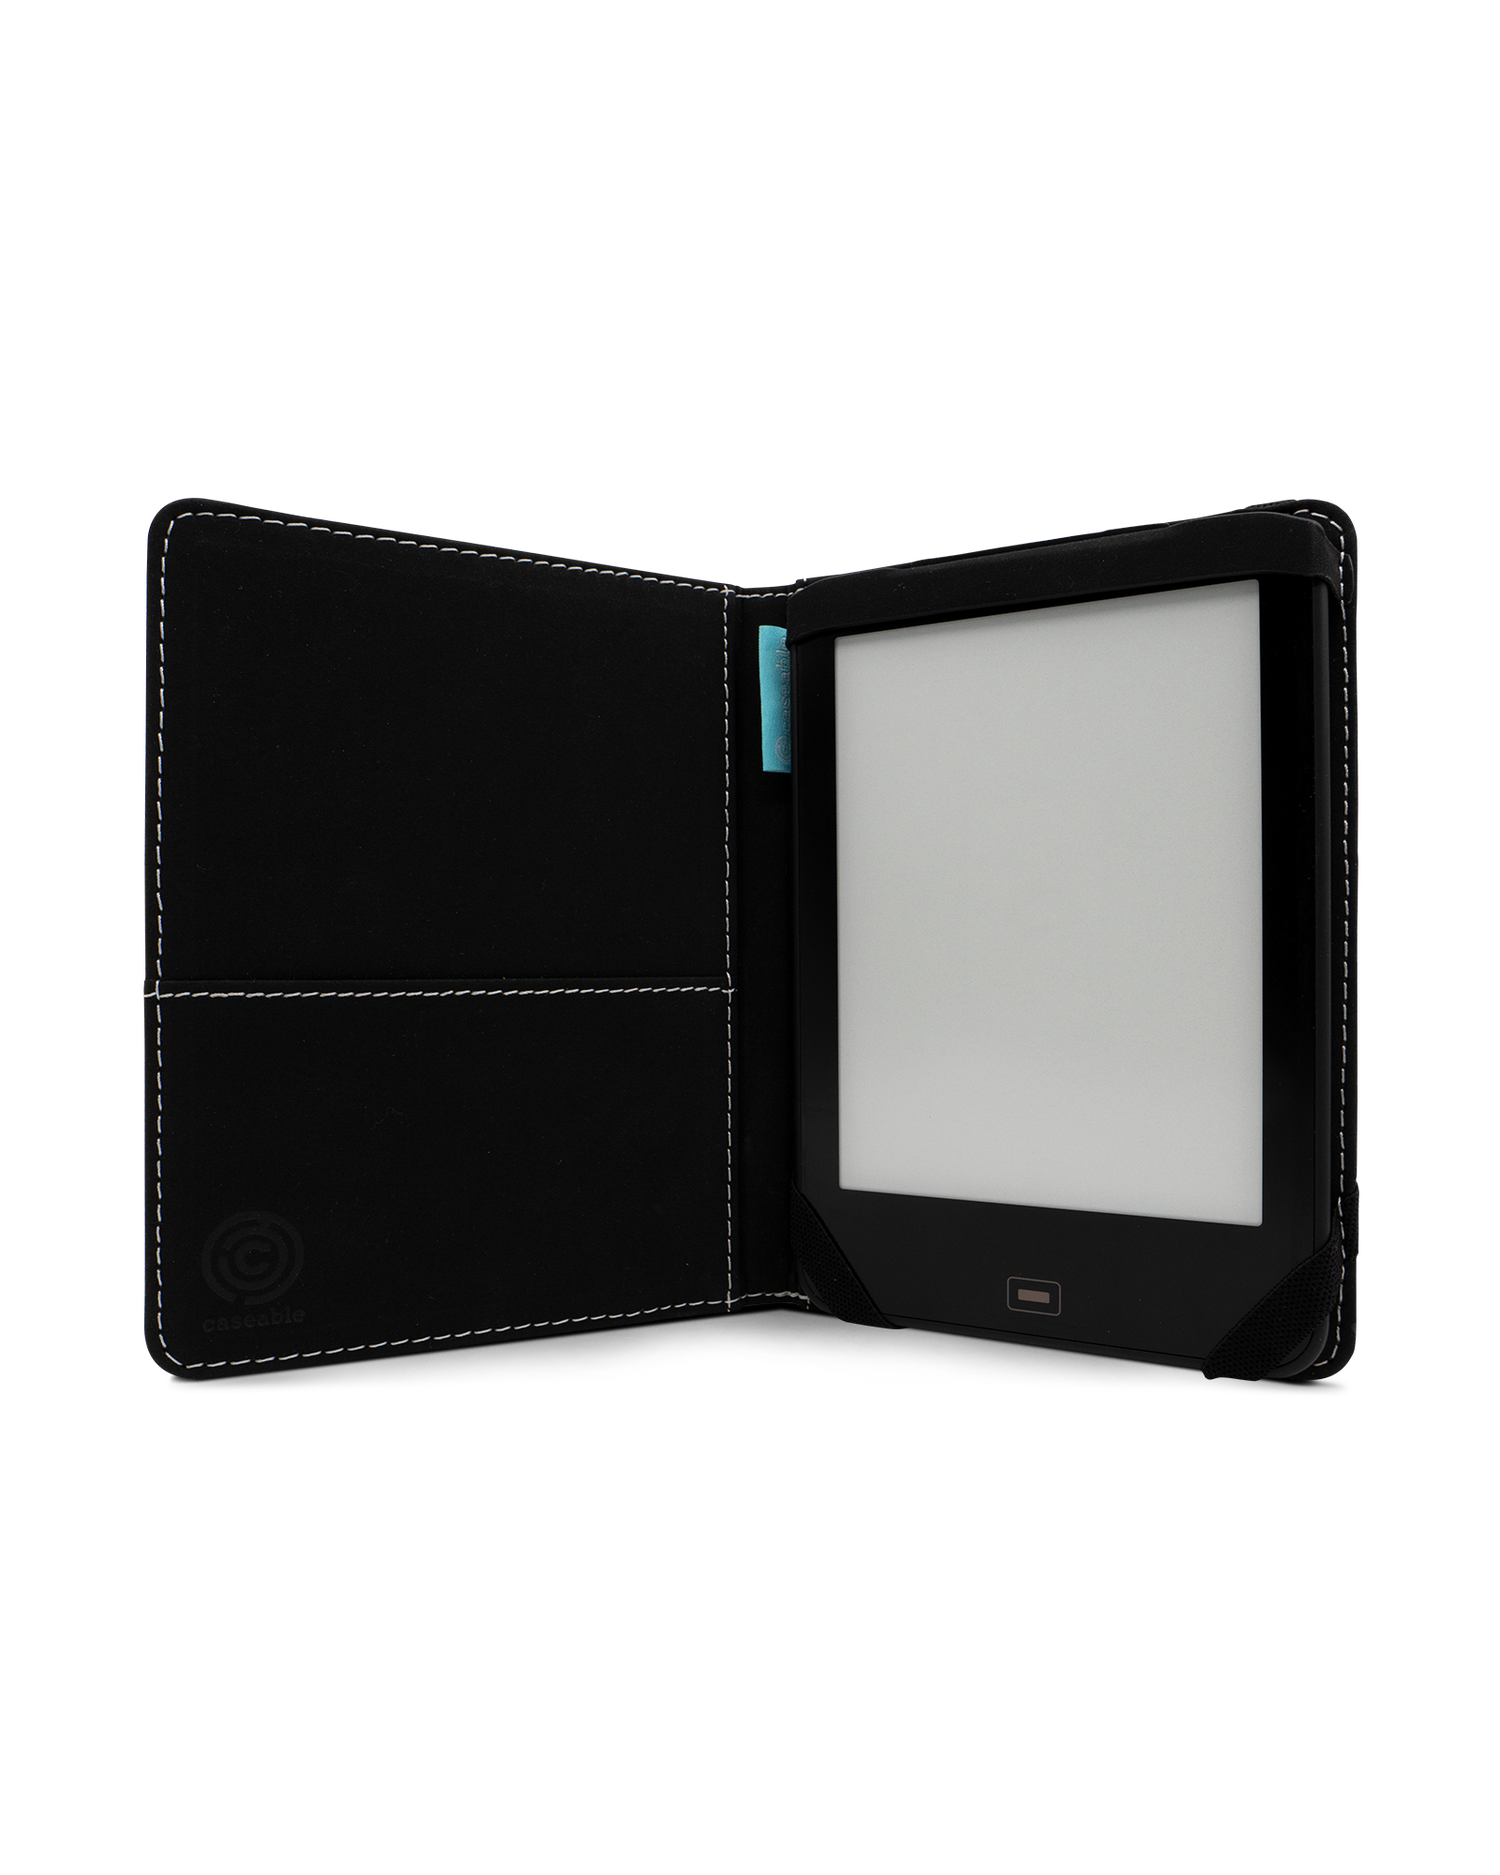 Night Moves eReader Case for tolino vision 1 to 4 HD: Opened interior view